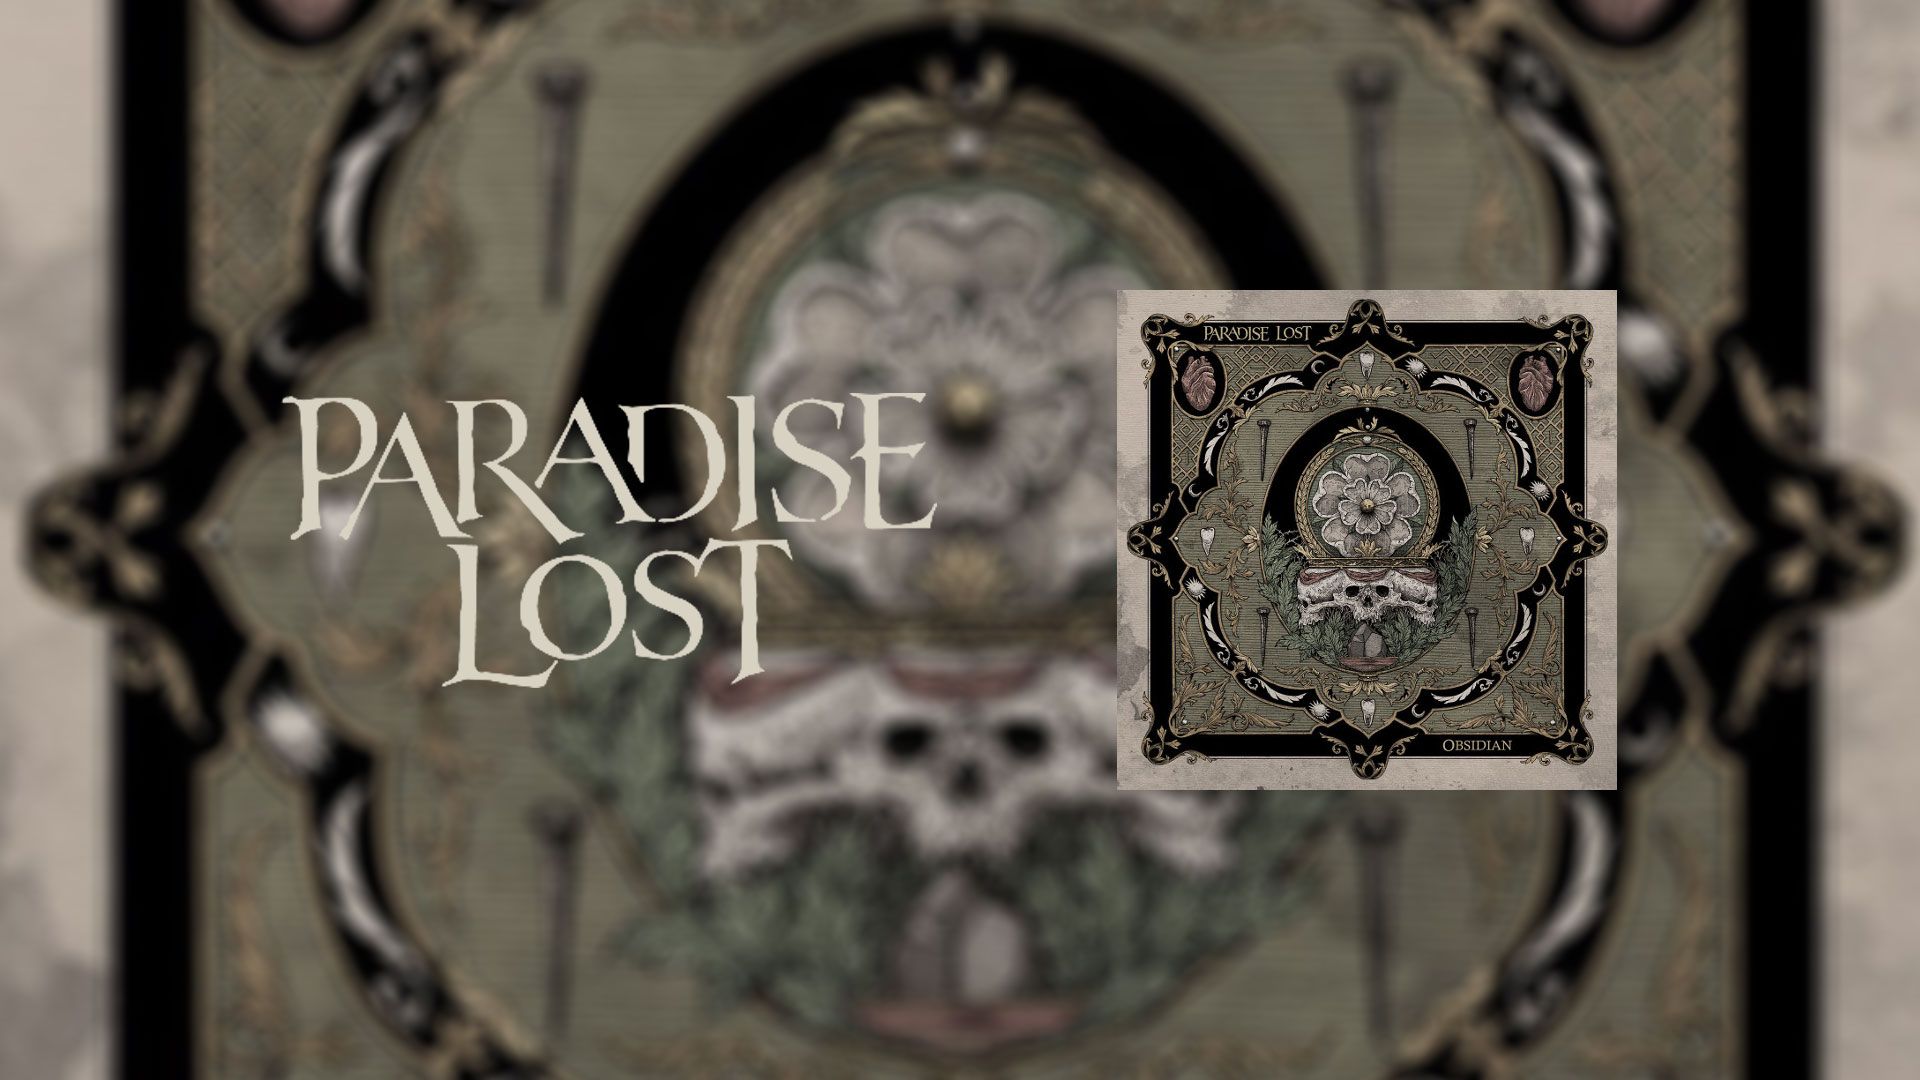 PARADISE LOST and Greg discuss